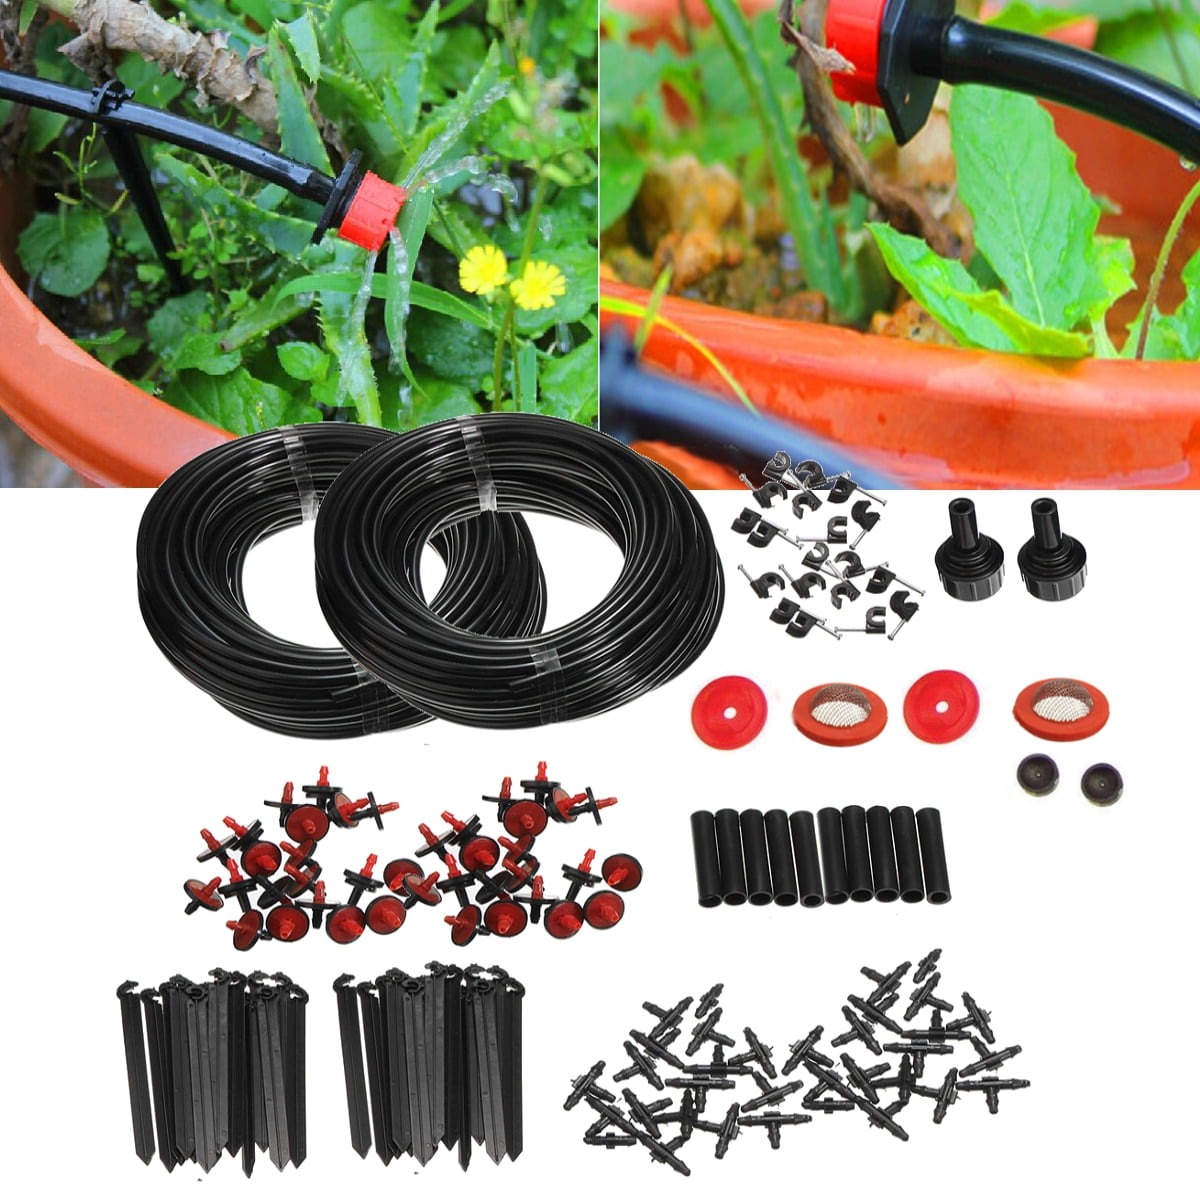 Automatic Drip Irrigation System Kit Plant Potted Self Watering Garden Hose 